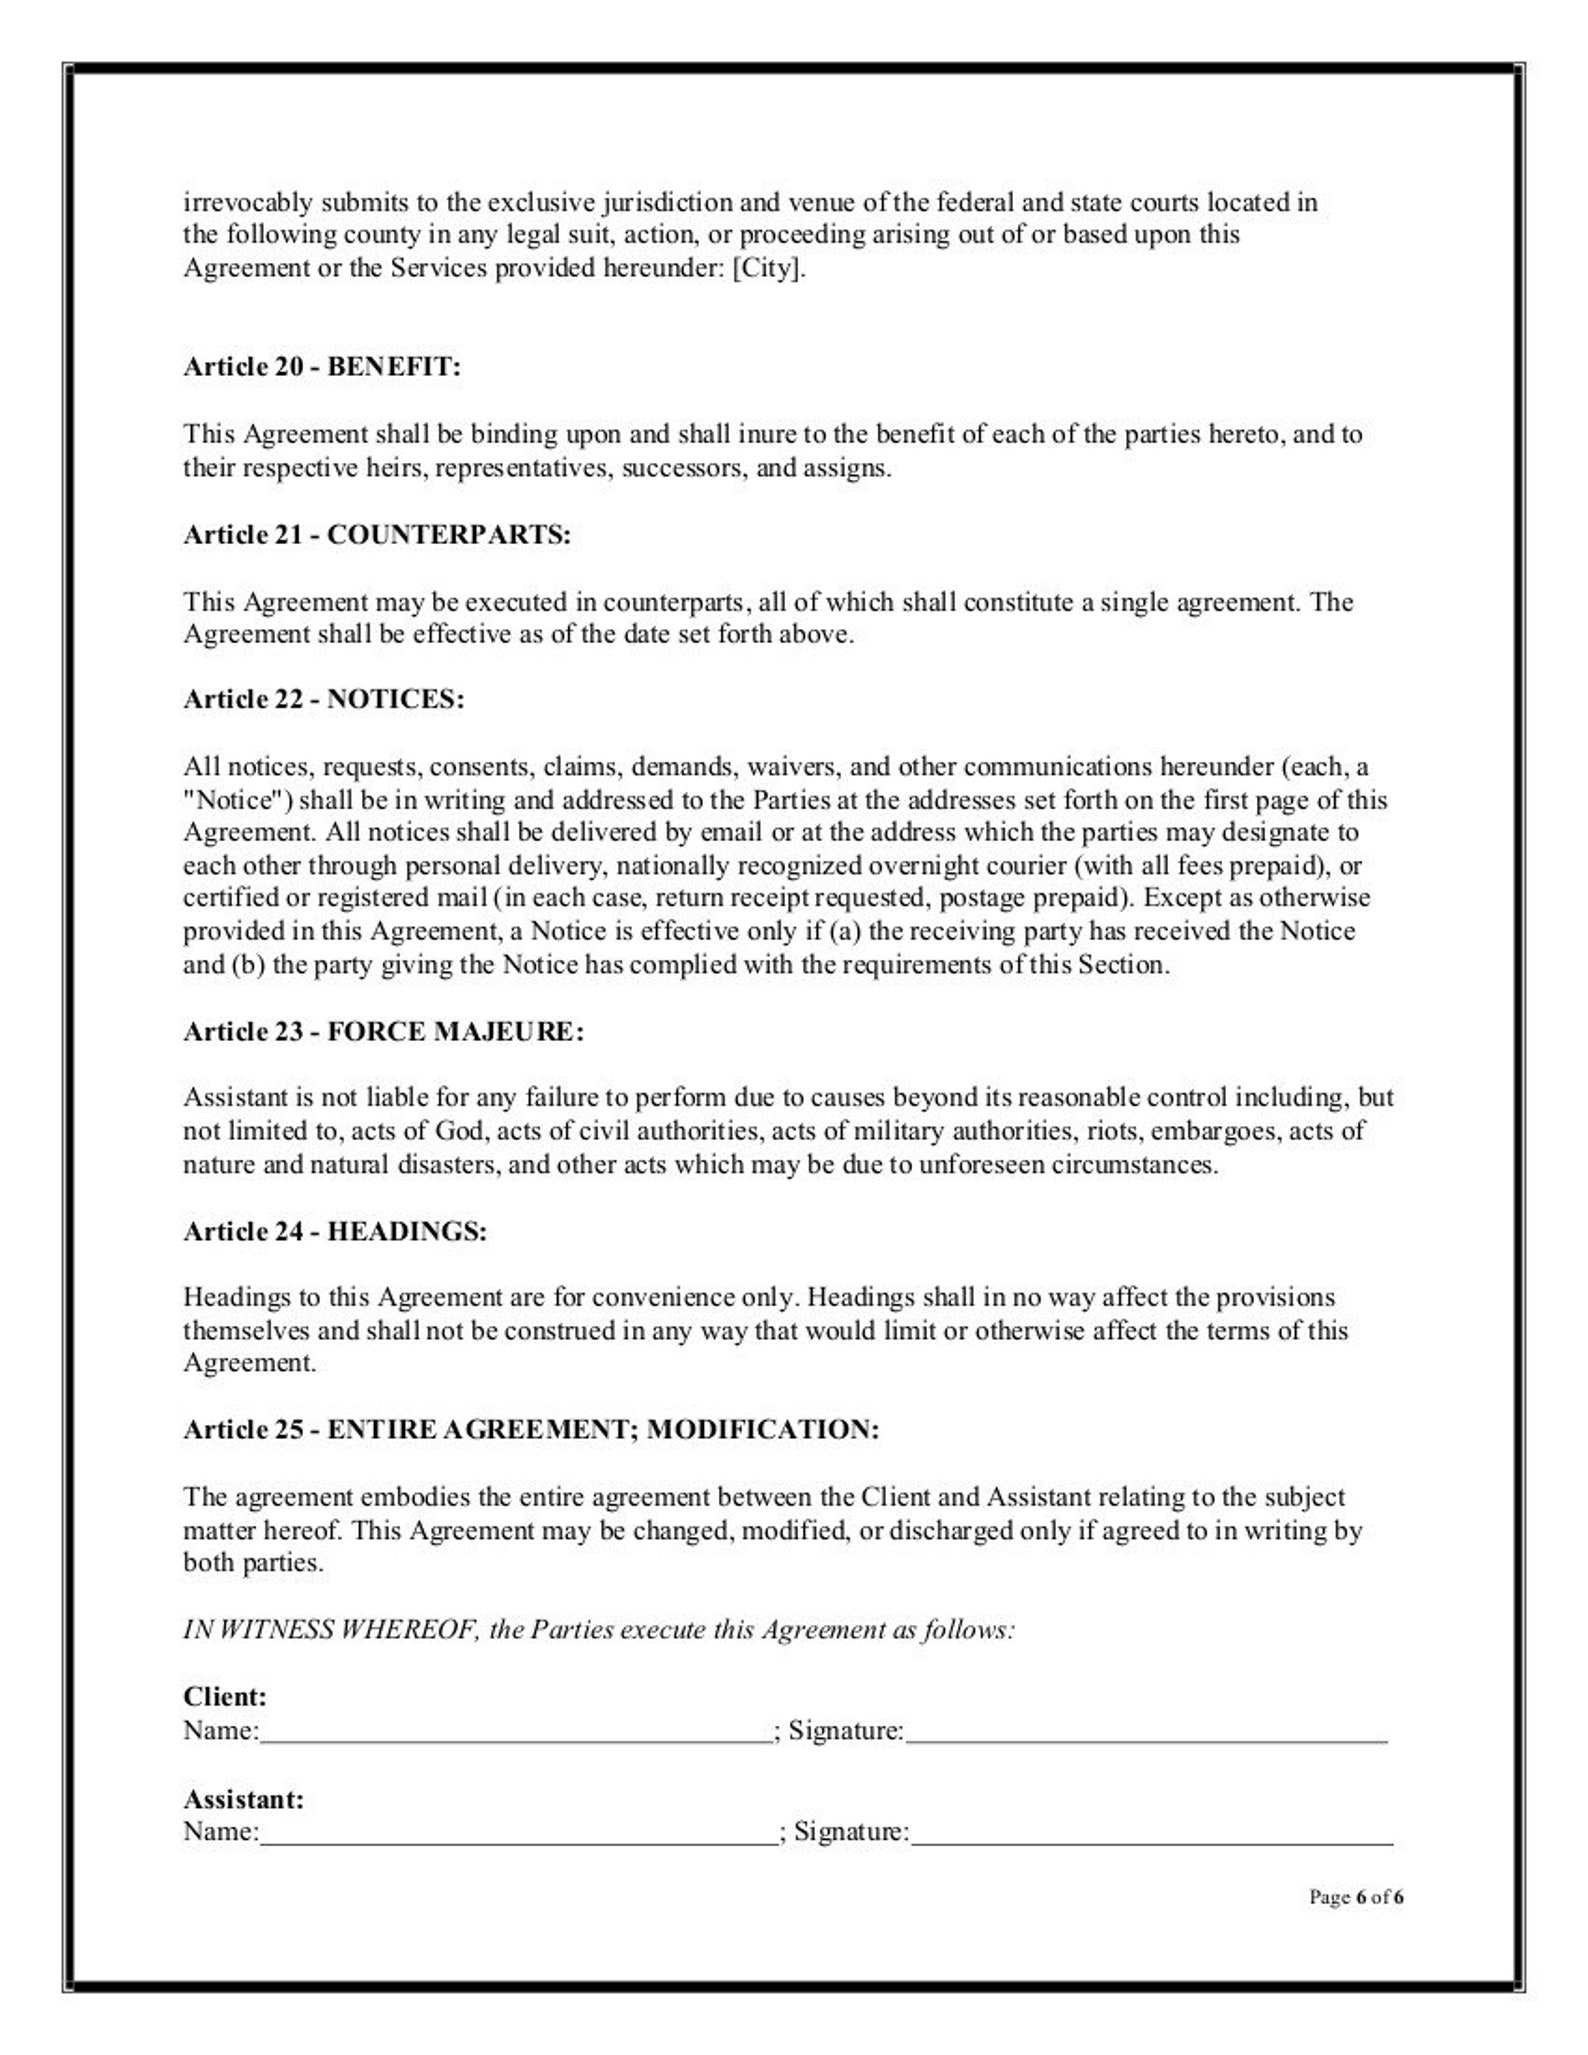 printable-virtual-assistant-contract-template-printable-templates